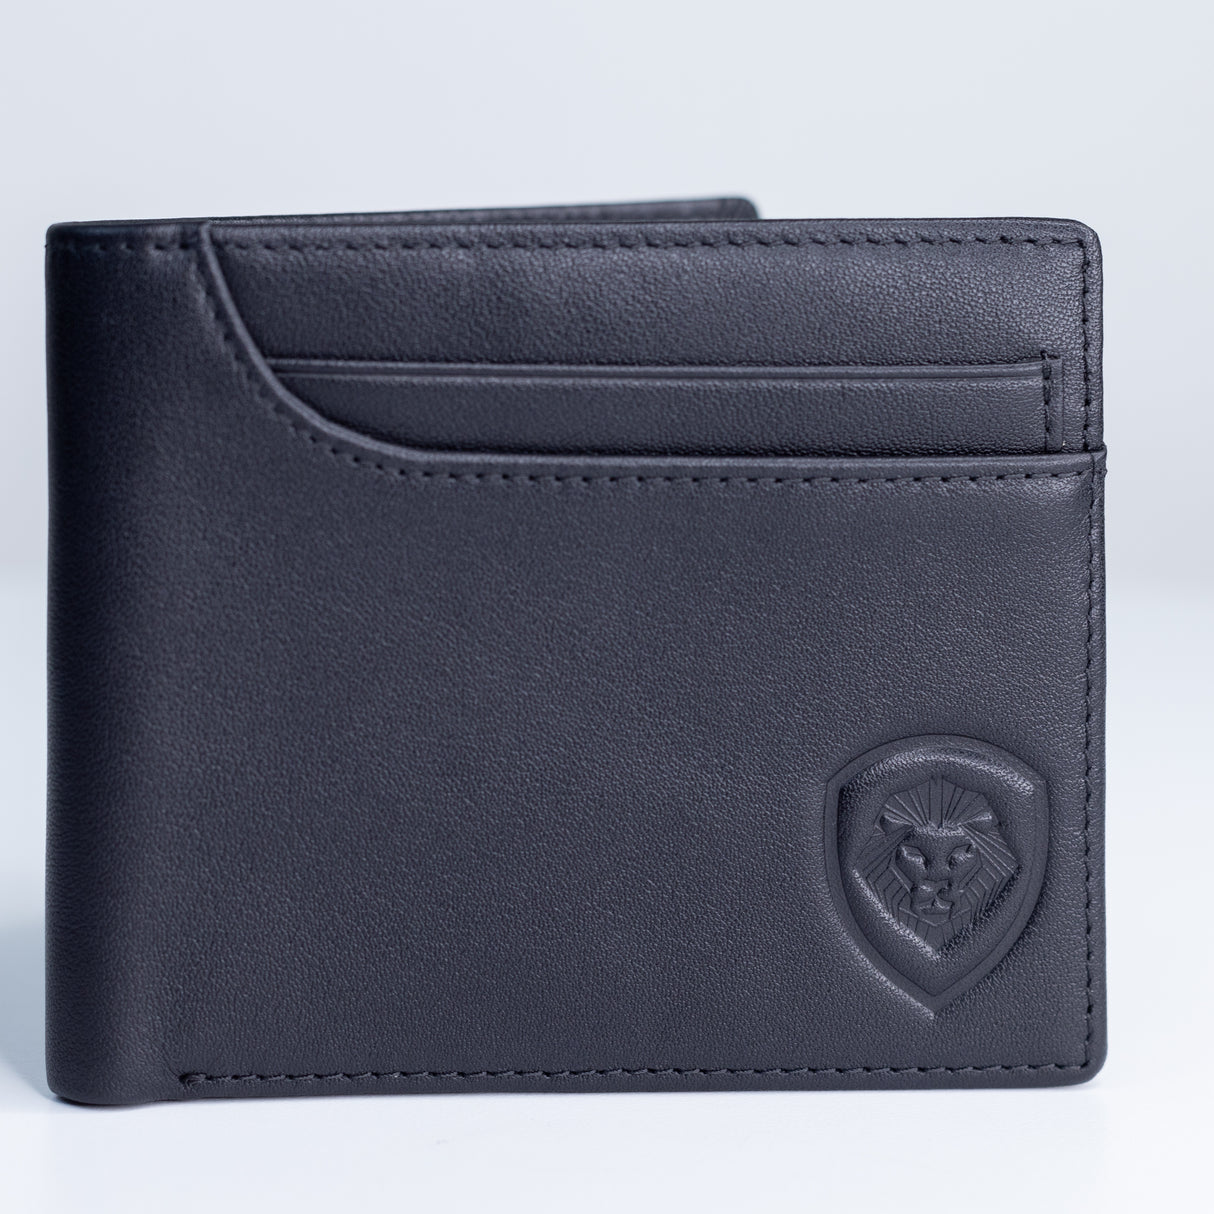 Valuetainment Wallet with Pockets - Black